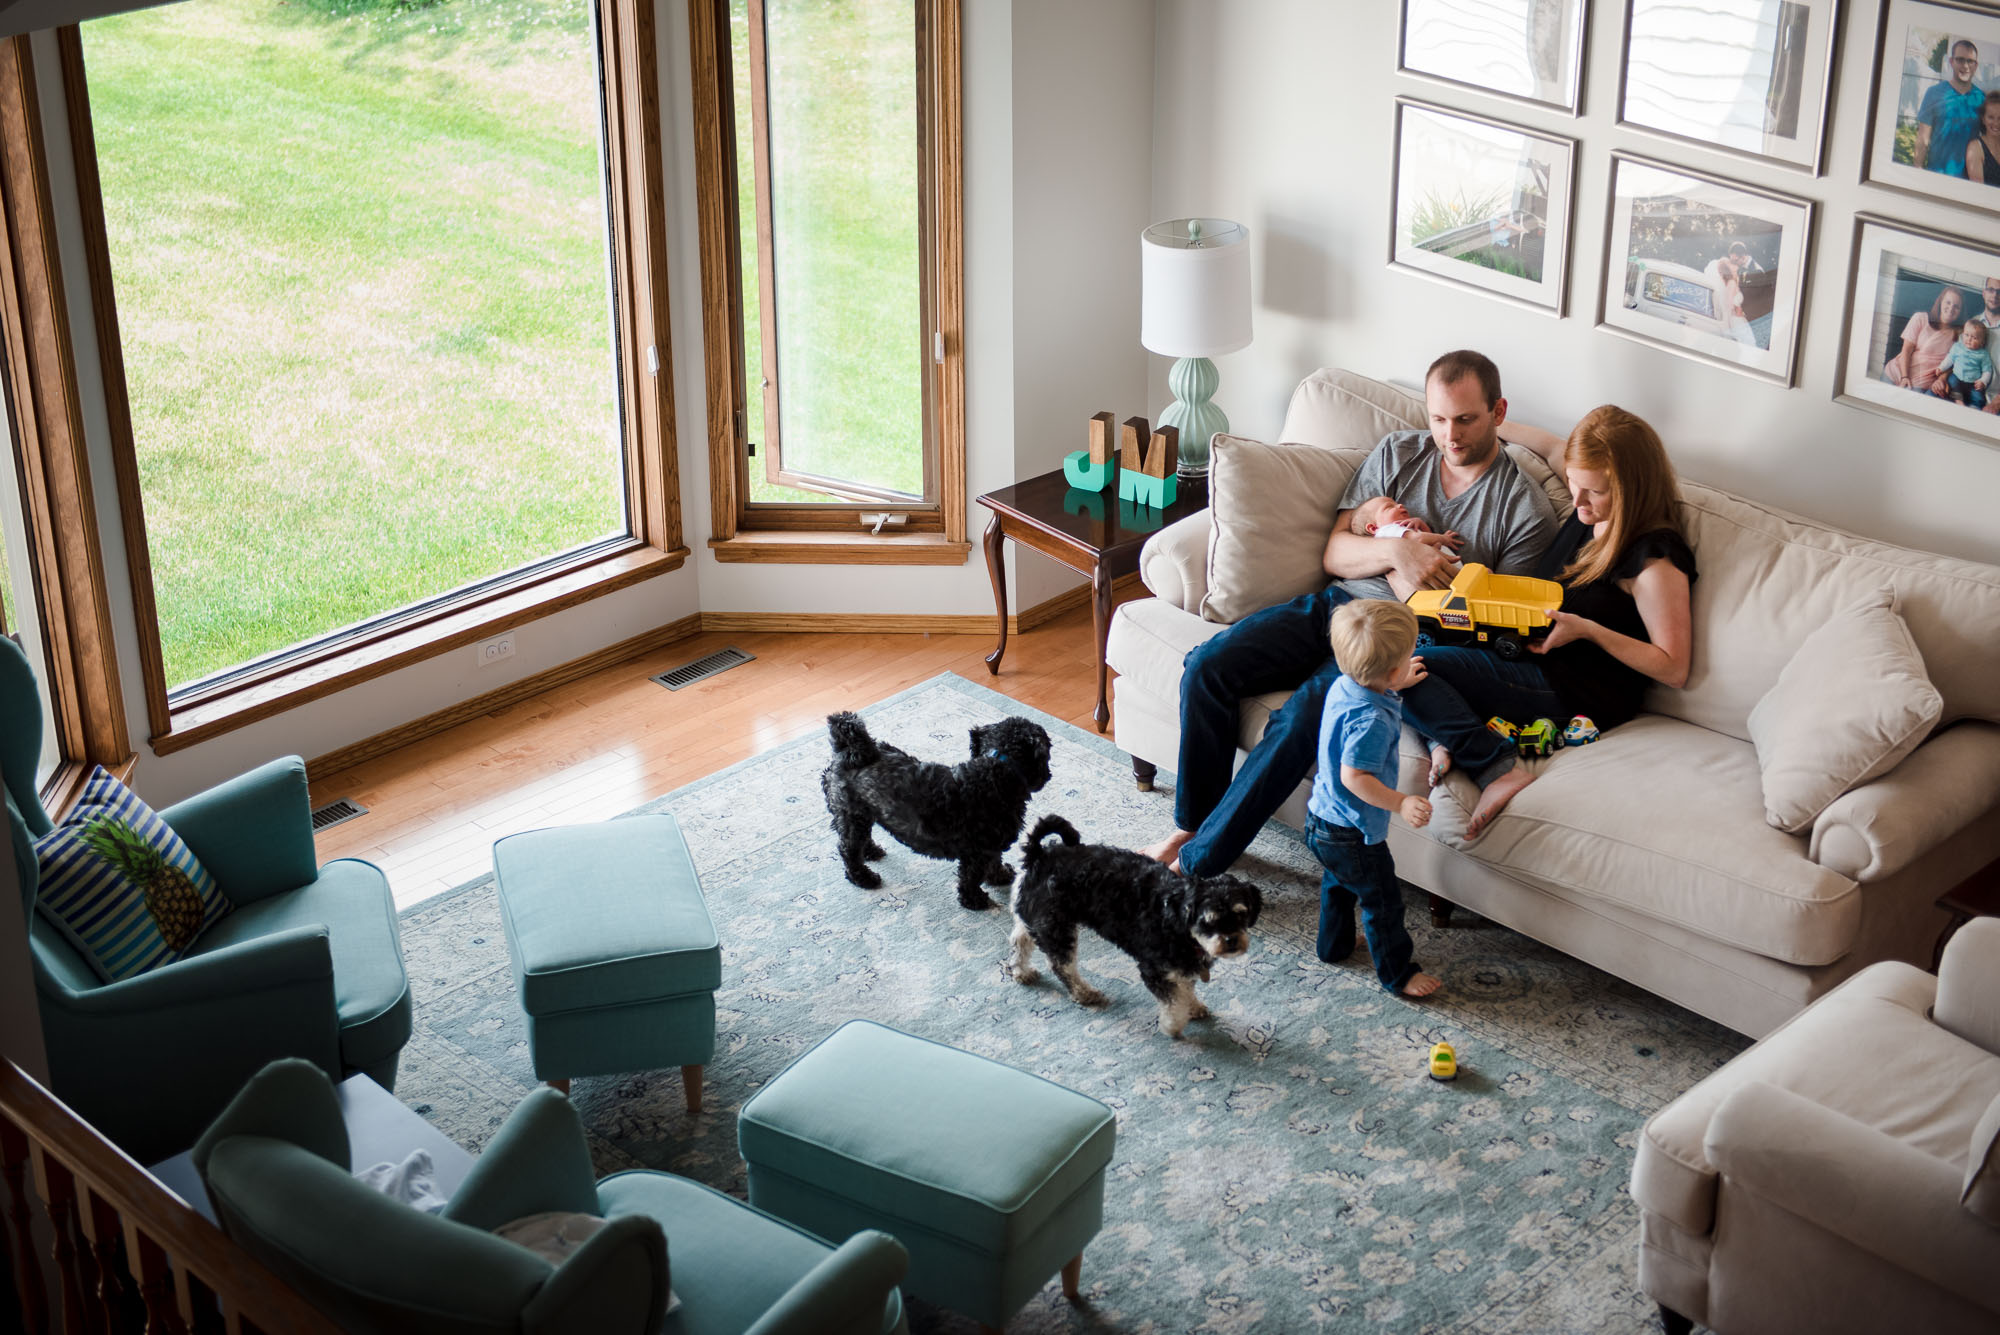 A family hangs out in their Sherwood Park, Alberta living room with their son and newborn baby